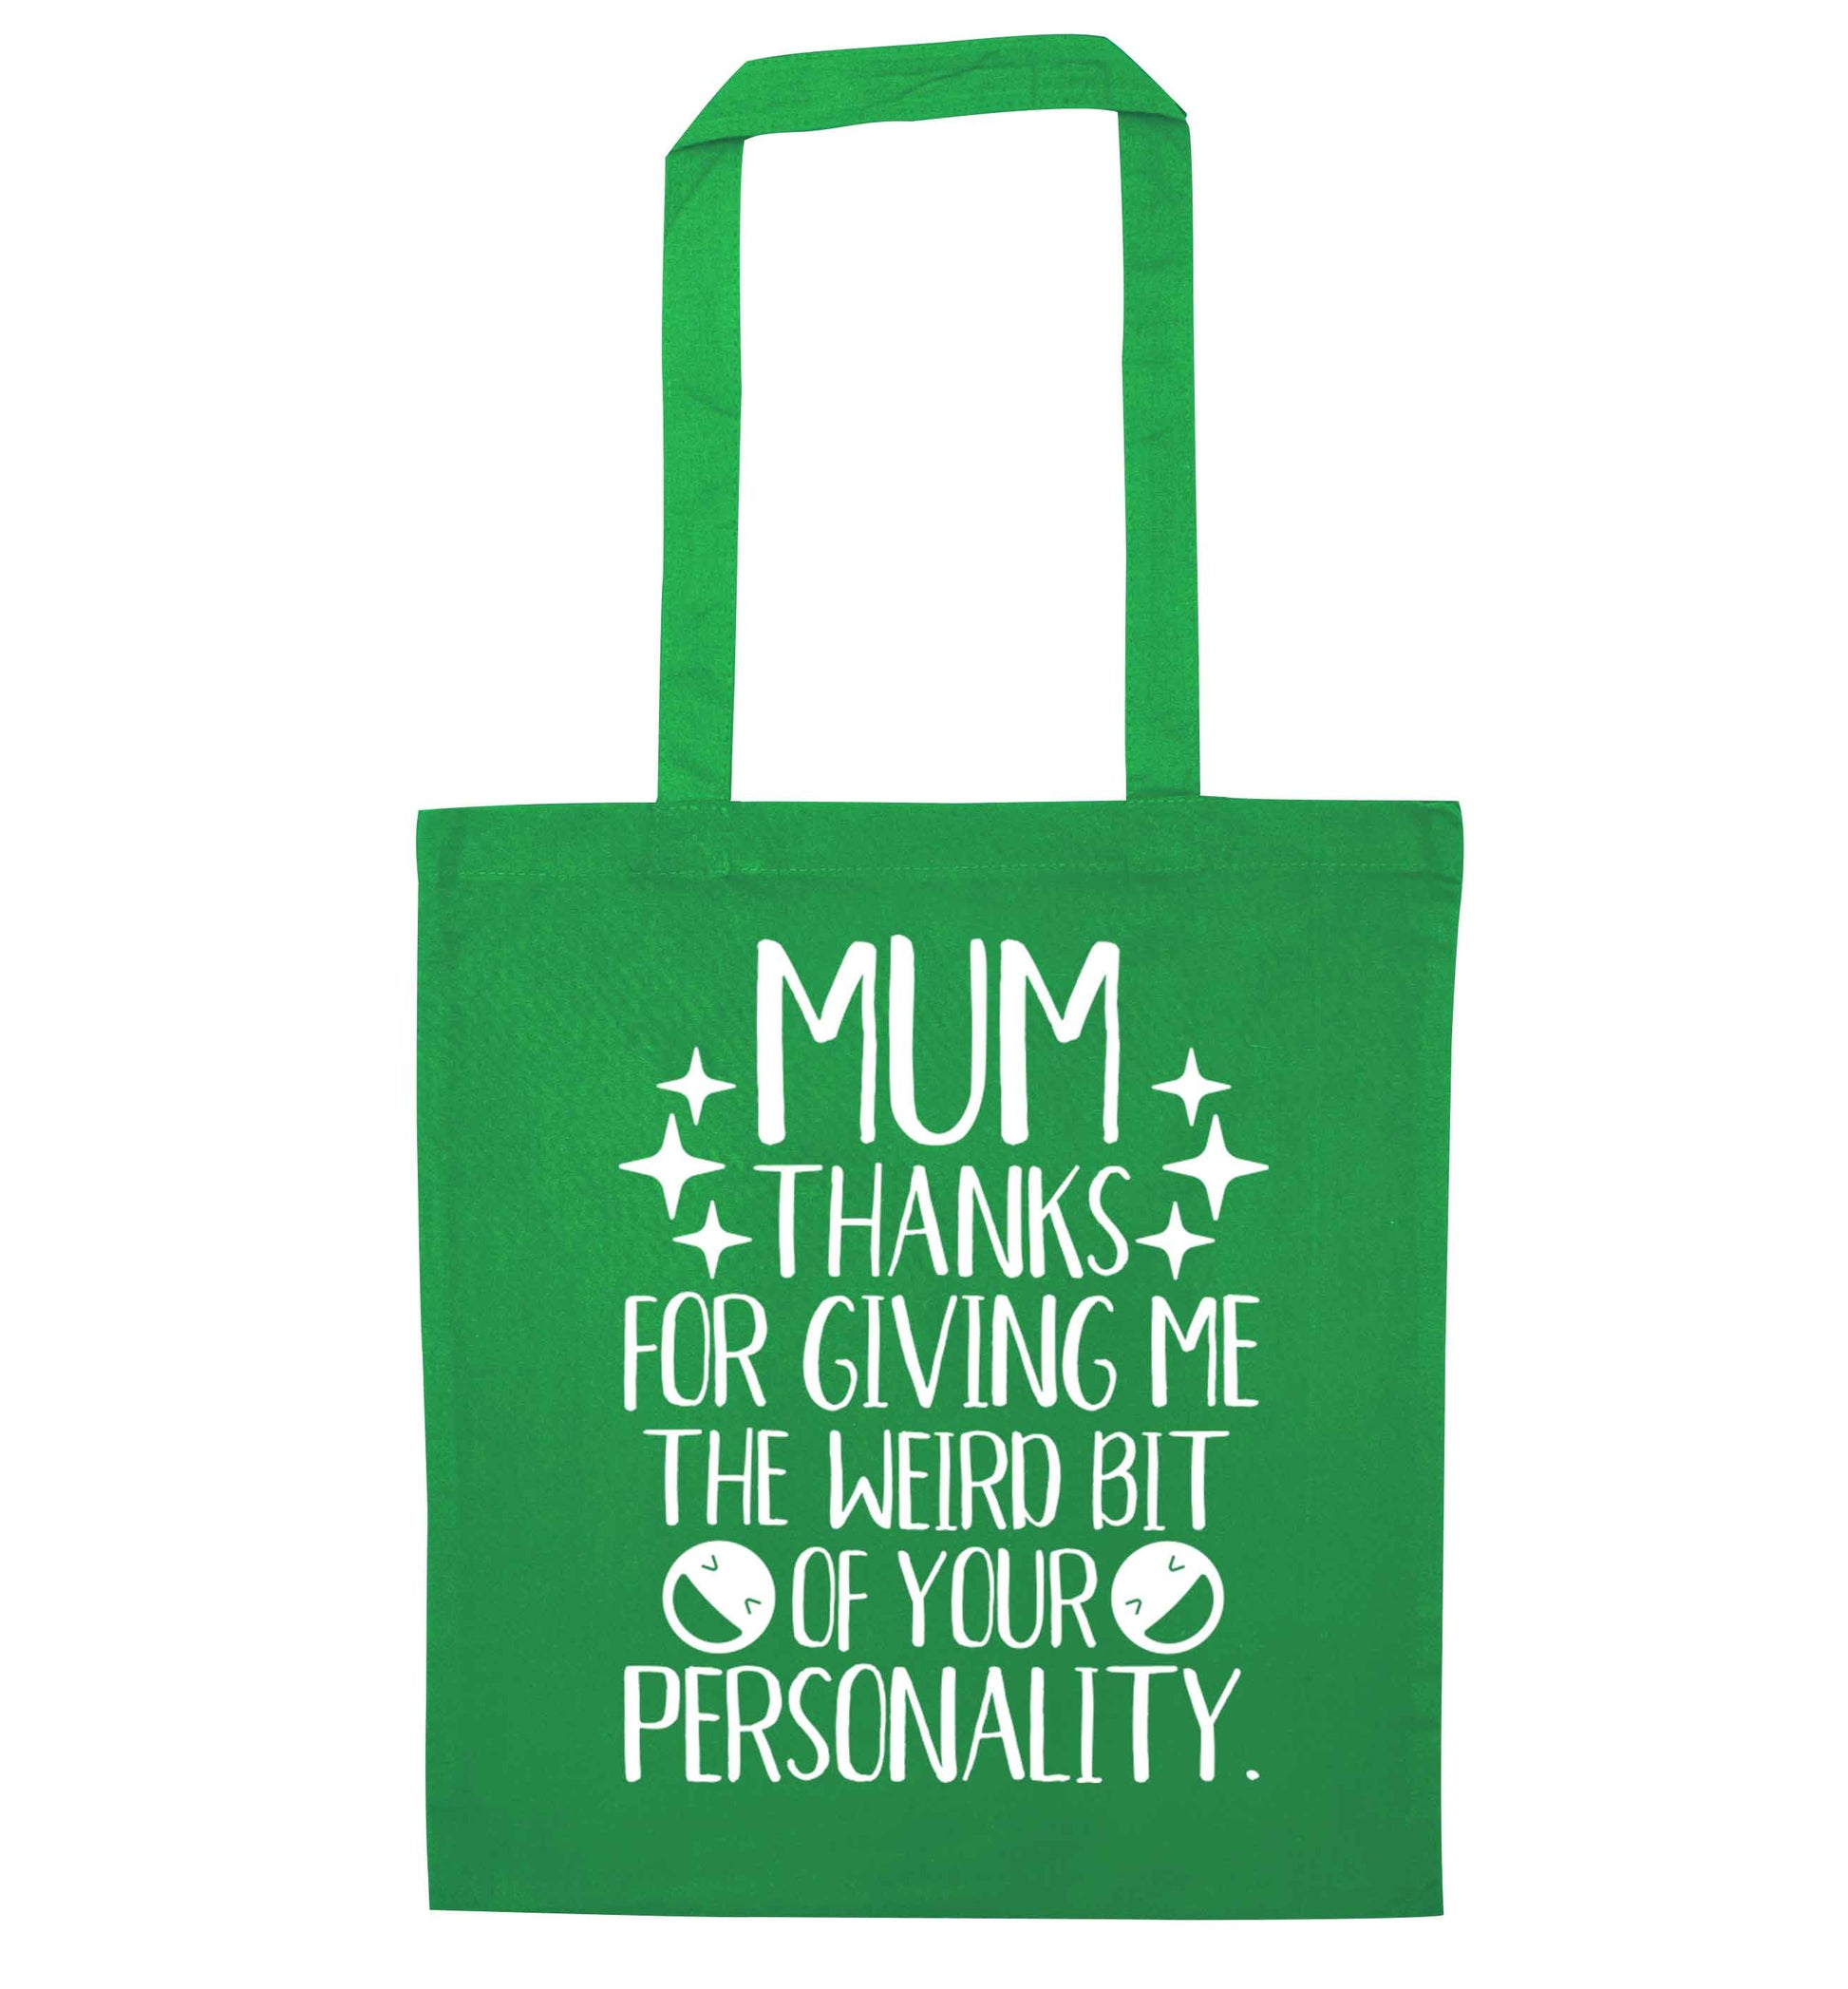 Mum, I love you more than halloumi and if you know me at all you know how deep that is green tote bag